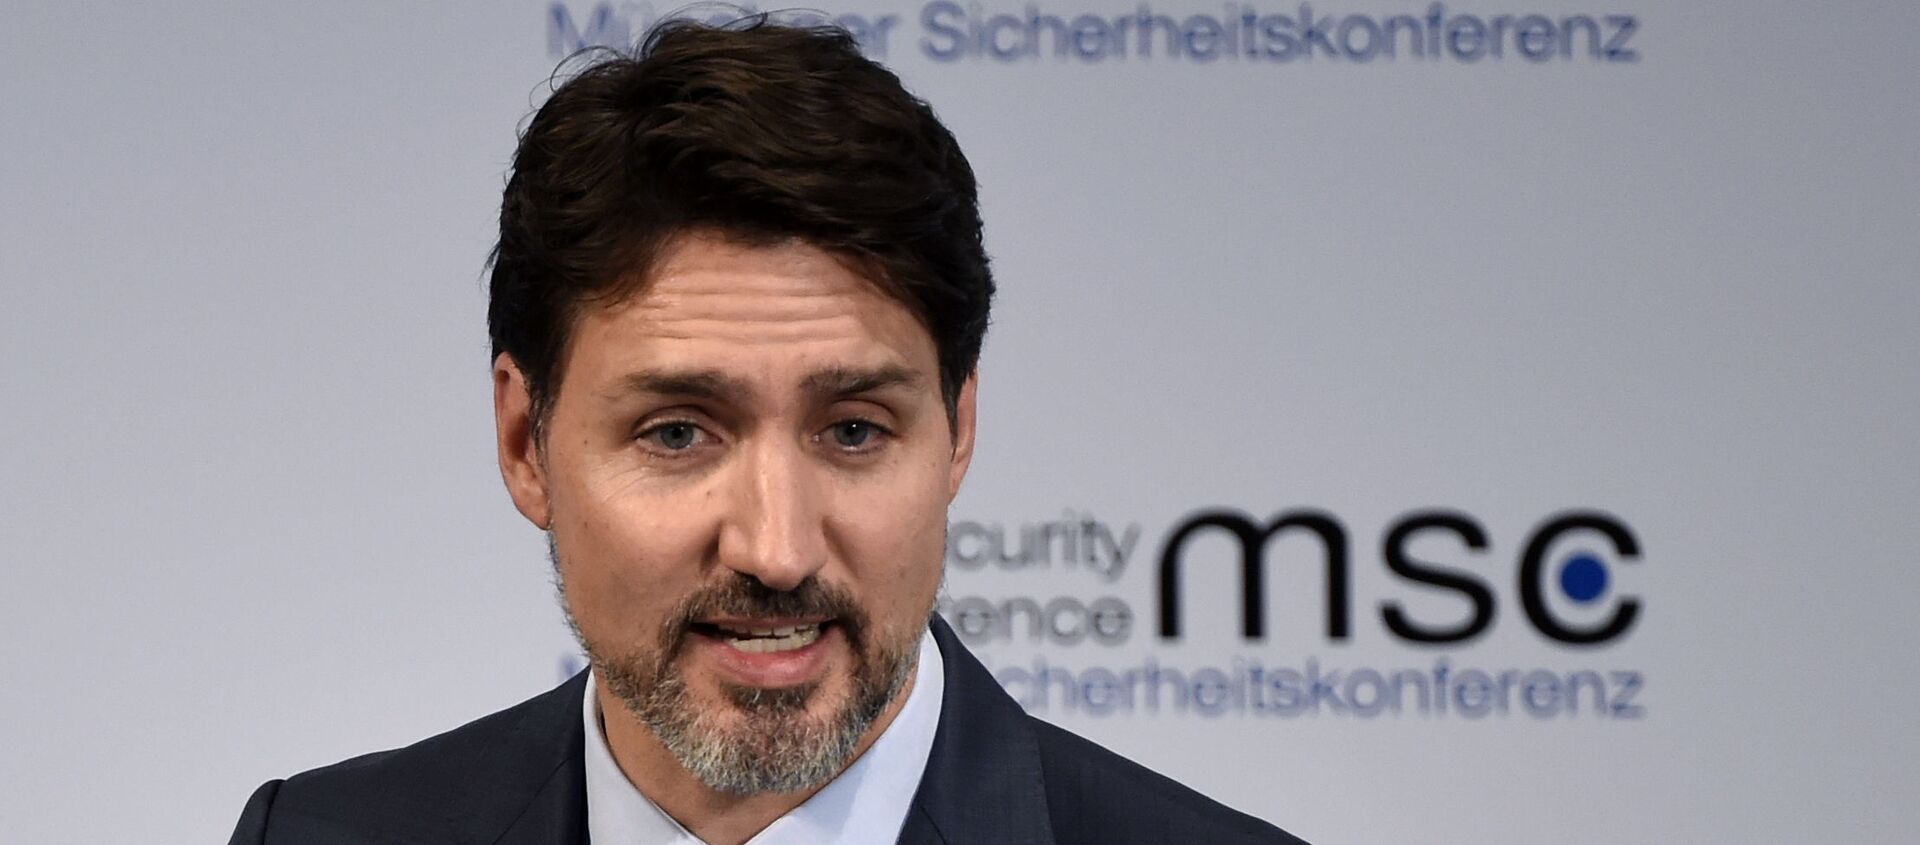 Justin Trudeau, Prime Minister of Canada speaks on the first day of the Munich Security Conference in Munich, Germany, Friday, Feb. 14, 2020. - Sputnik International, 1920, 01.05.2020